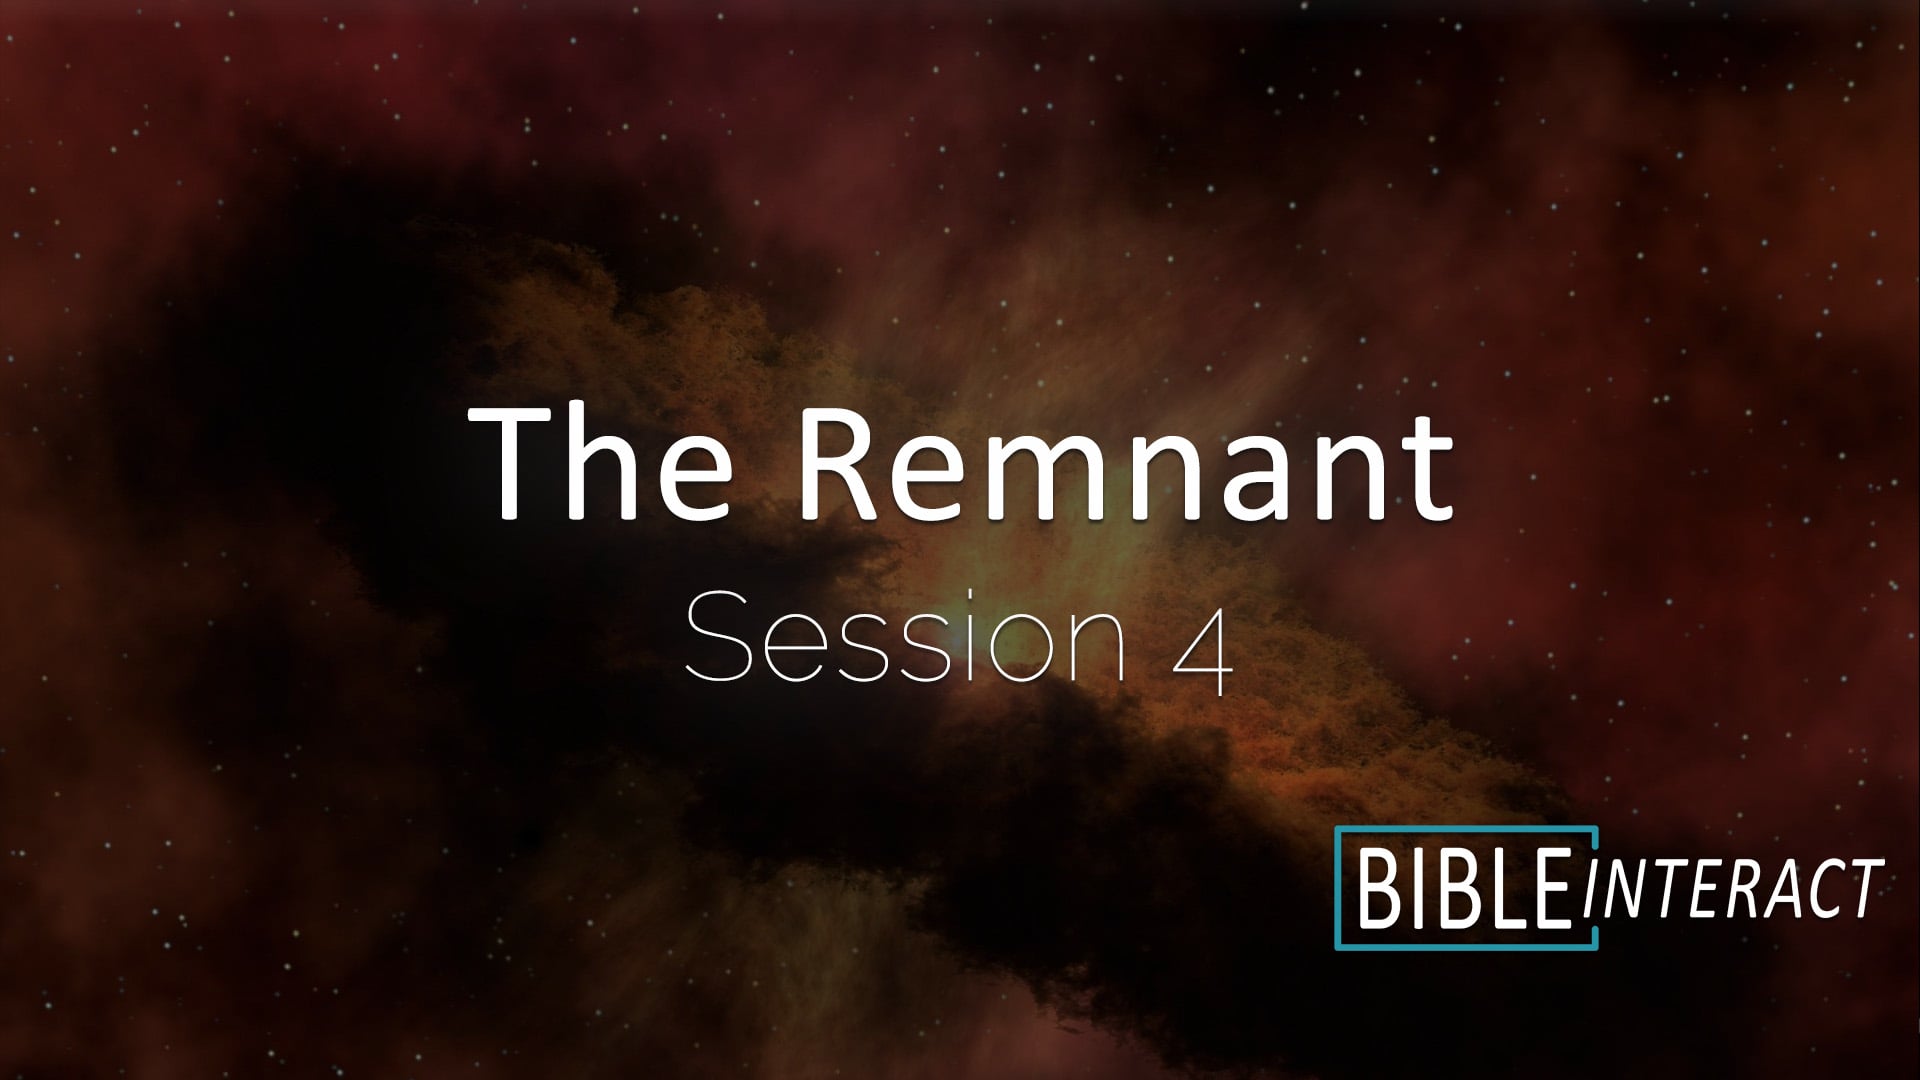 Are You Ready for the Remnant Session 4